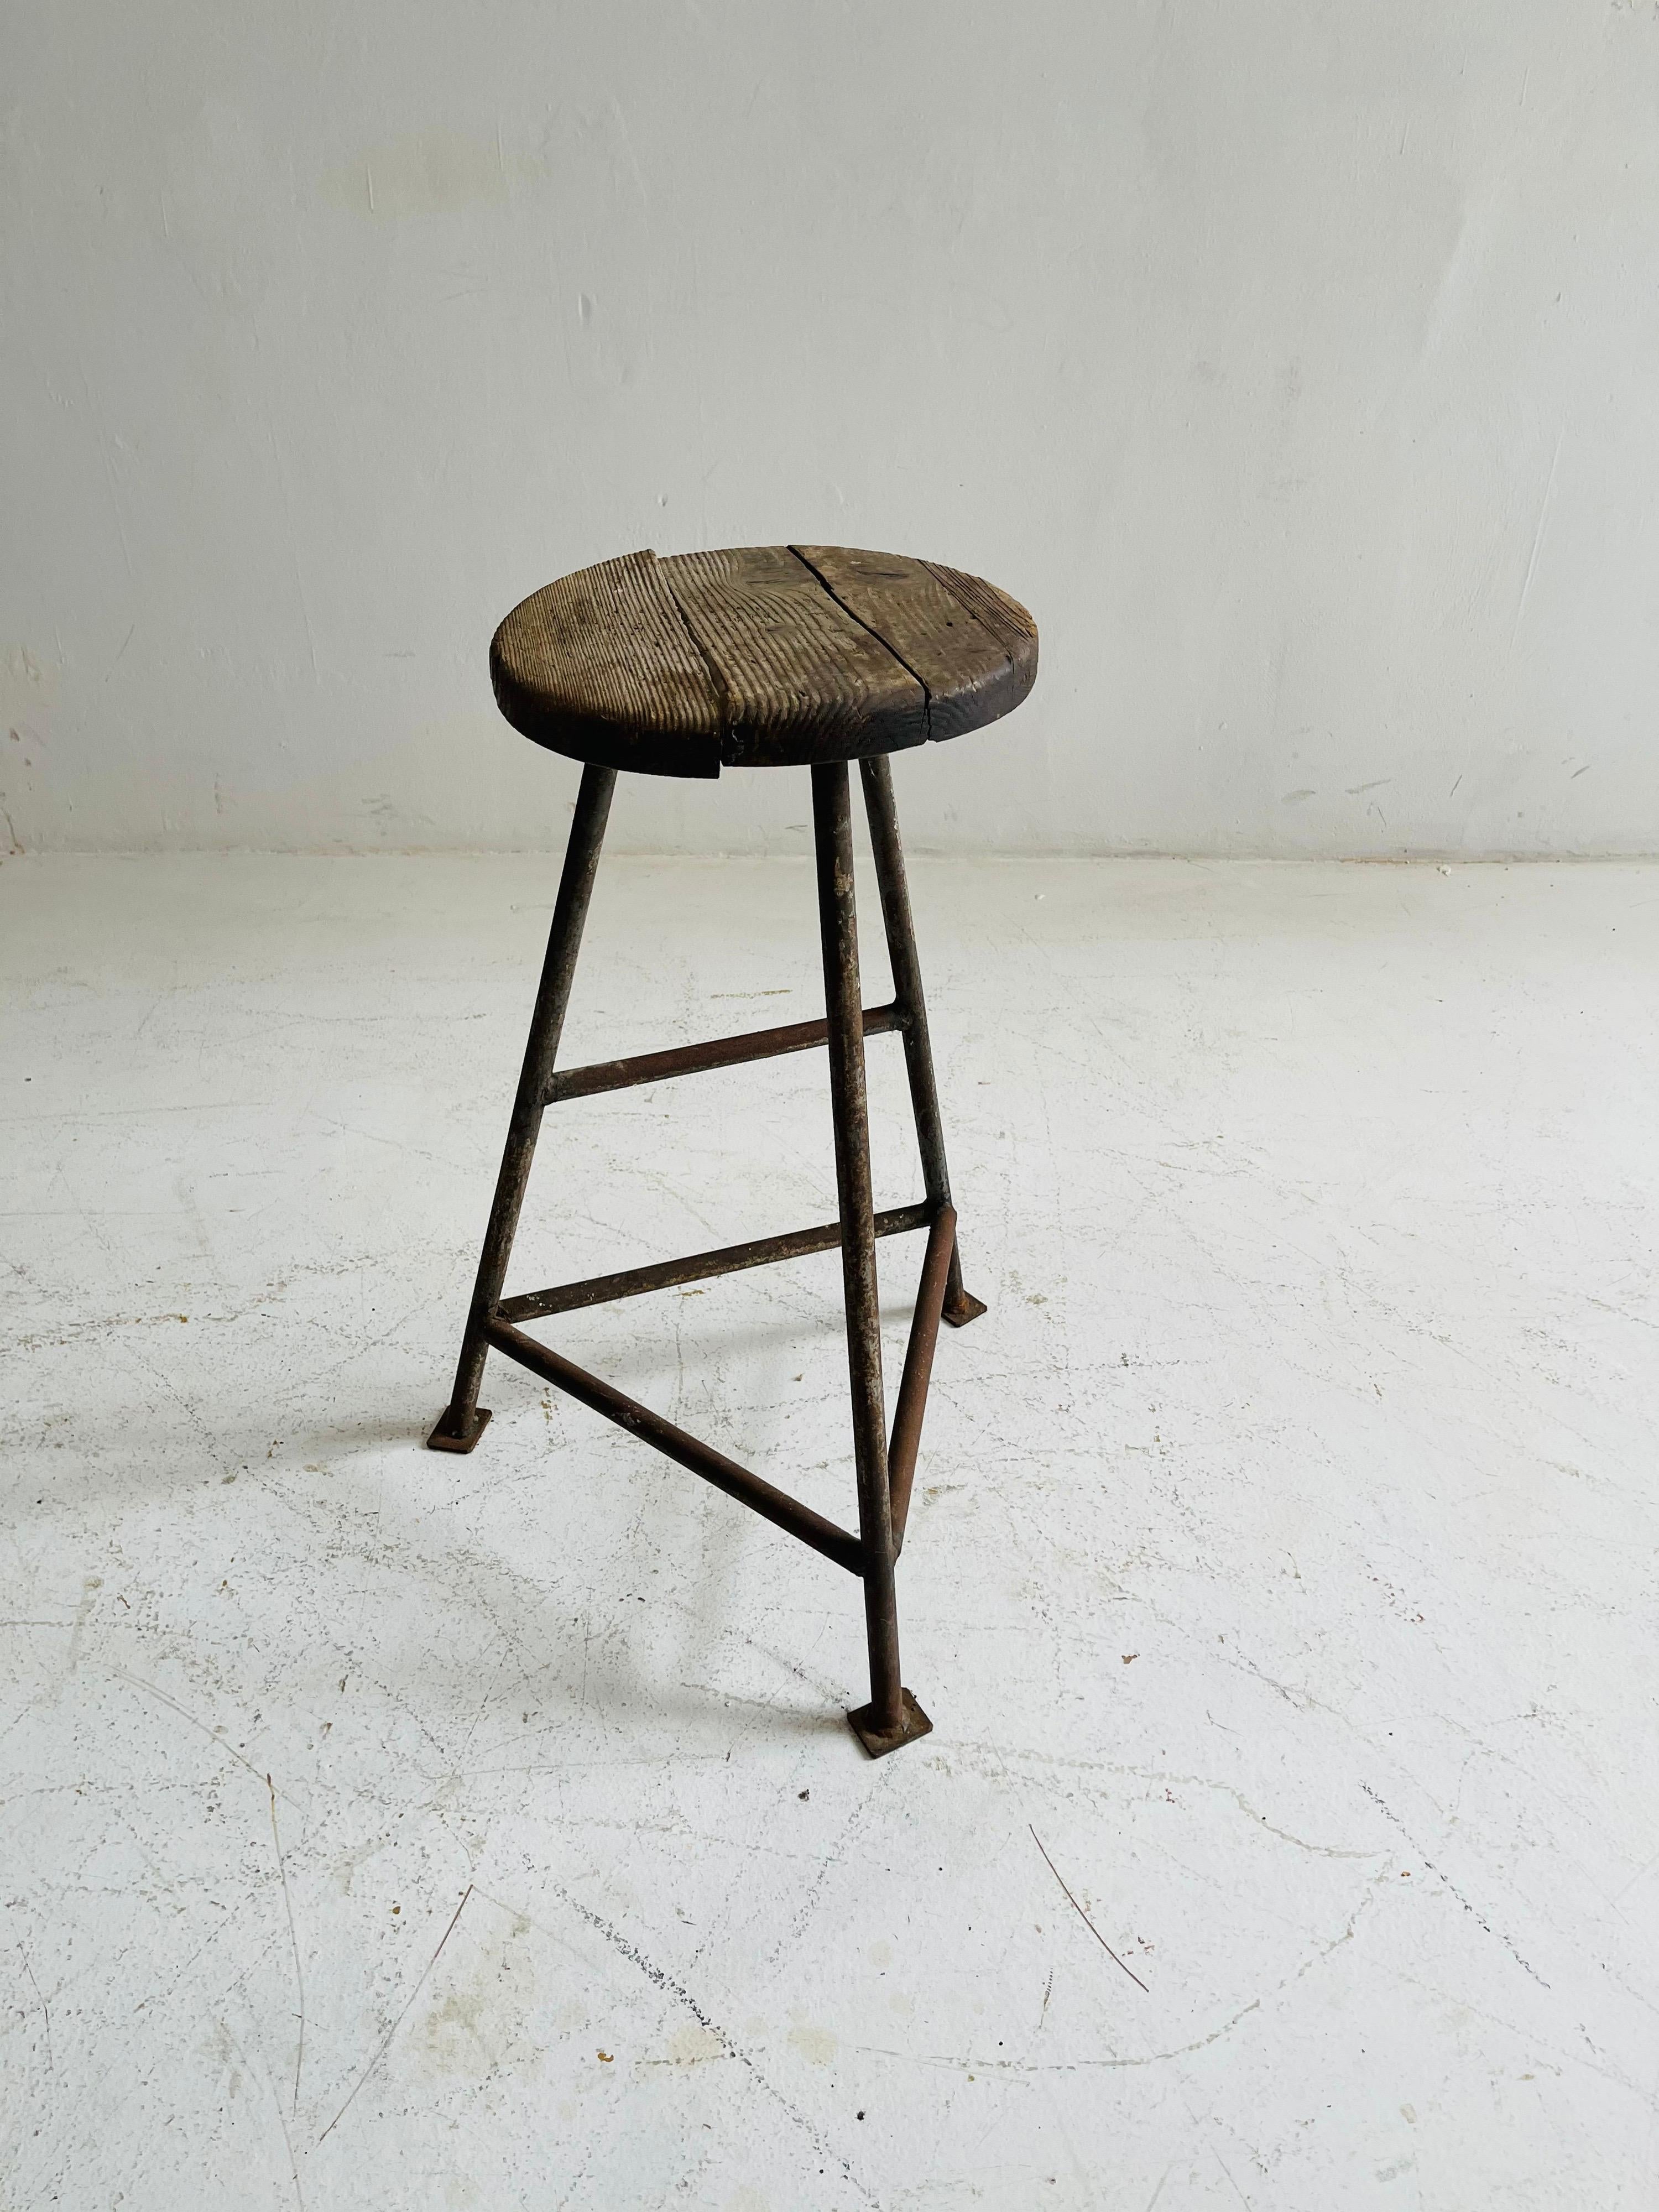 Patinated Industrial Factory Stools Group of Six, Austria, 1930s For Sale 4